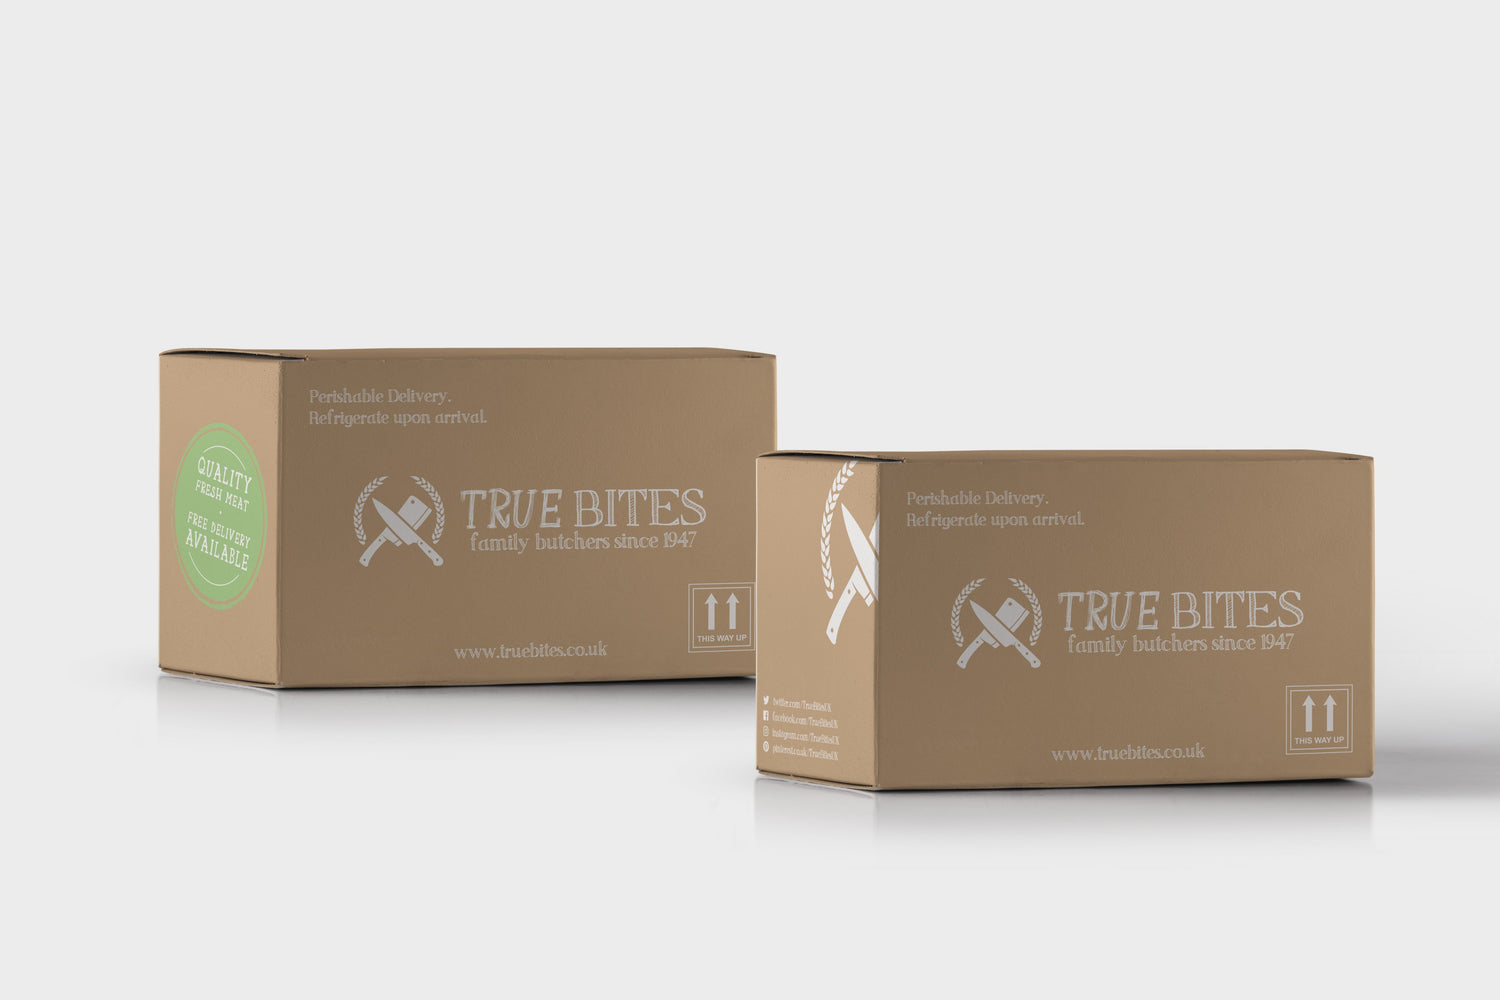 branded true bites delivery boxes on a white background